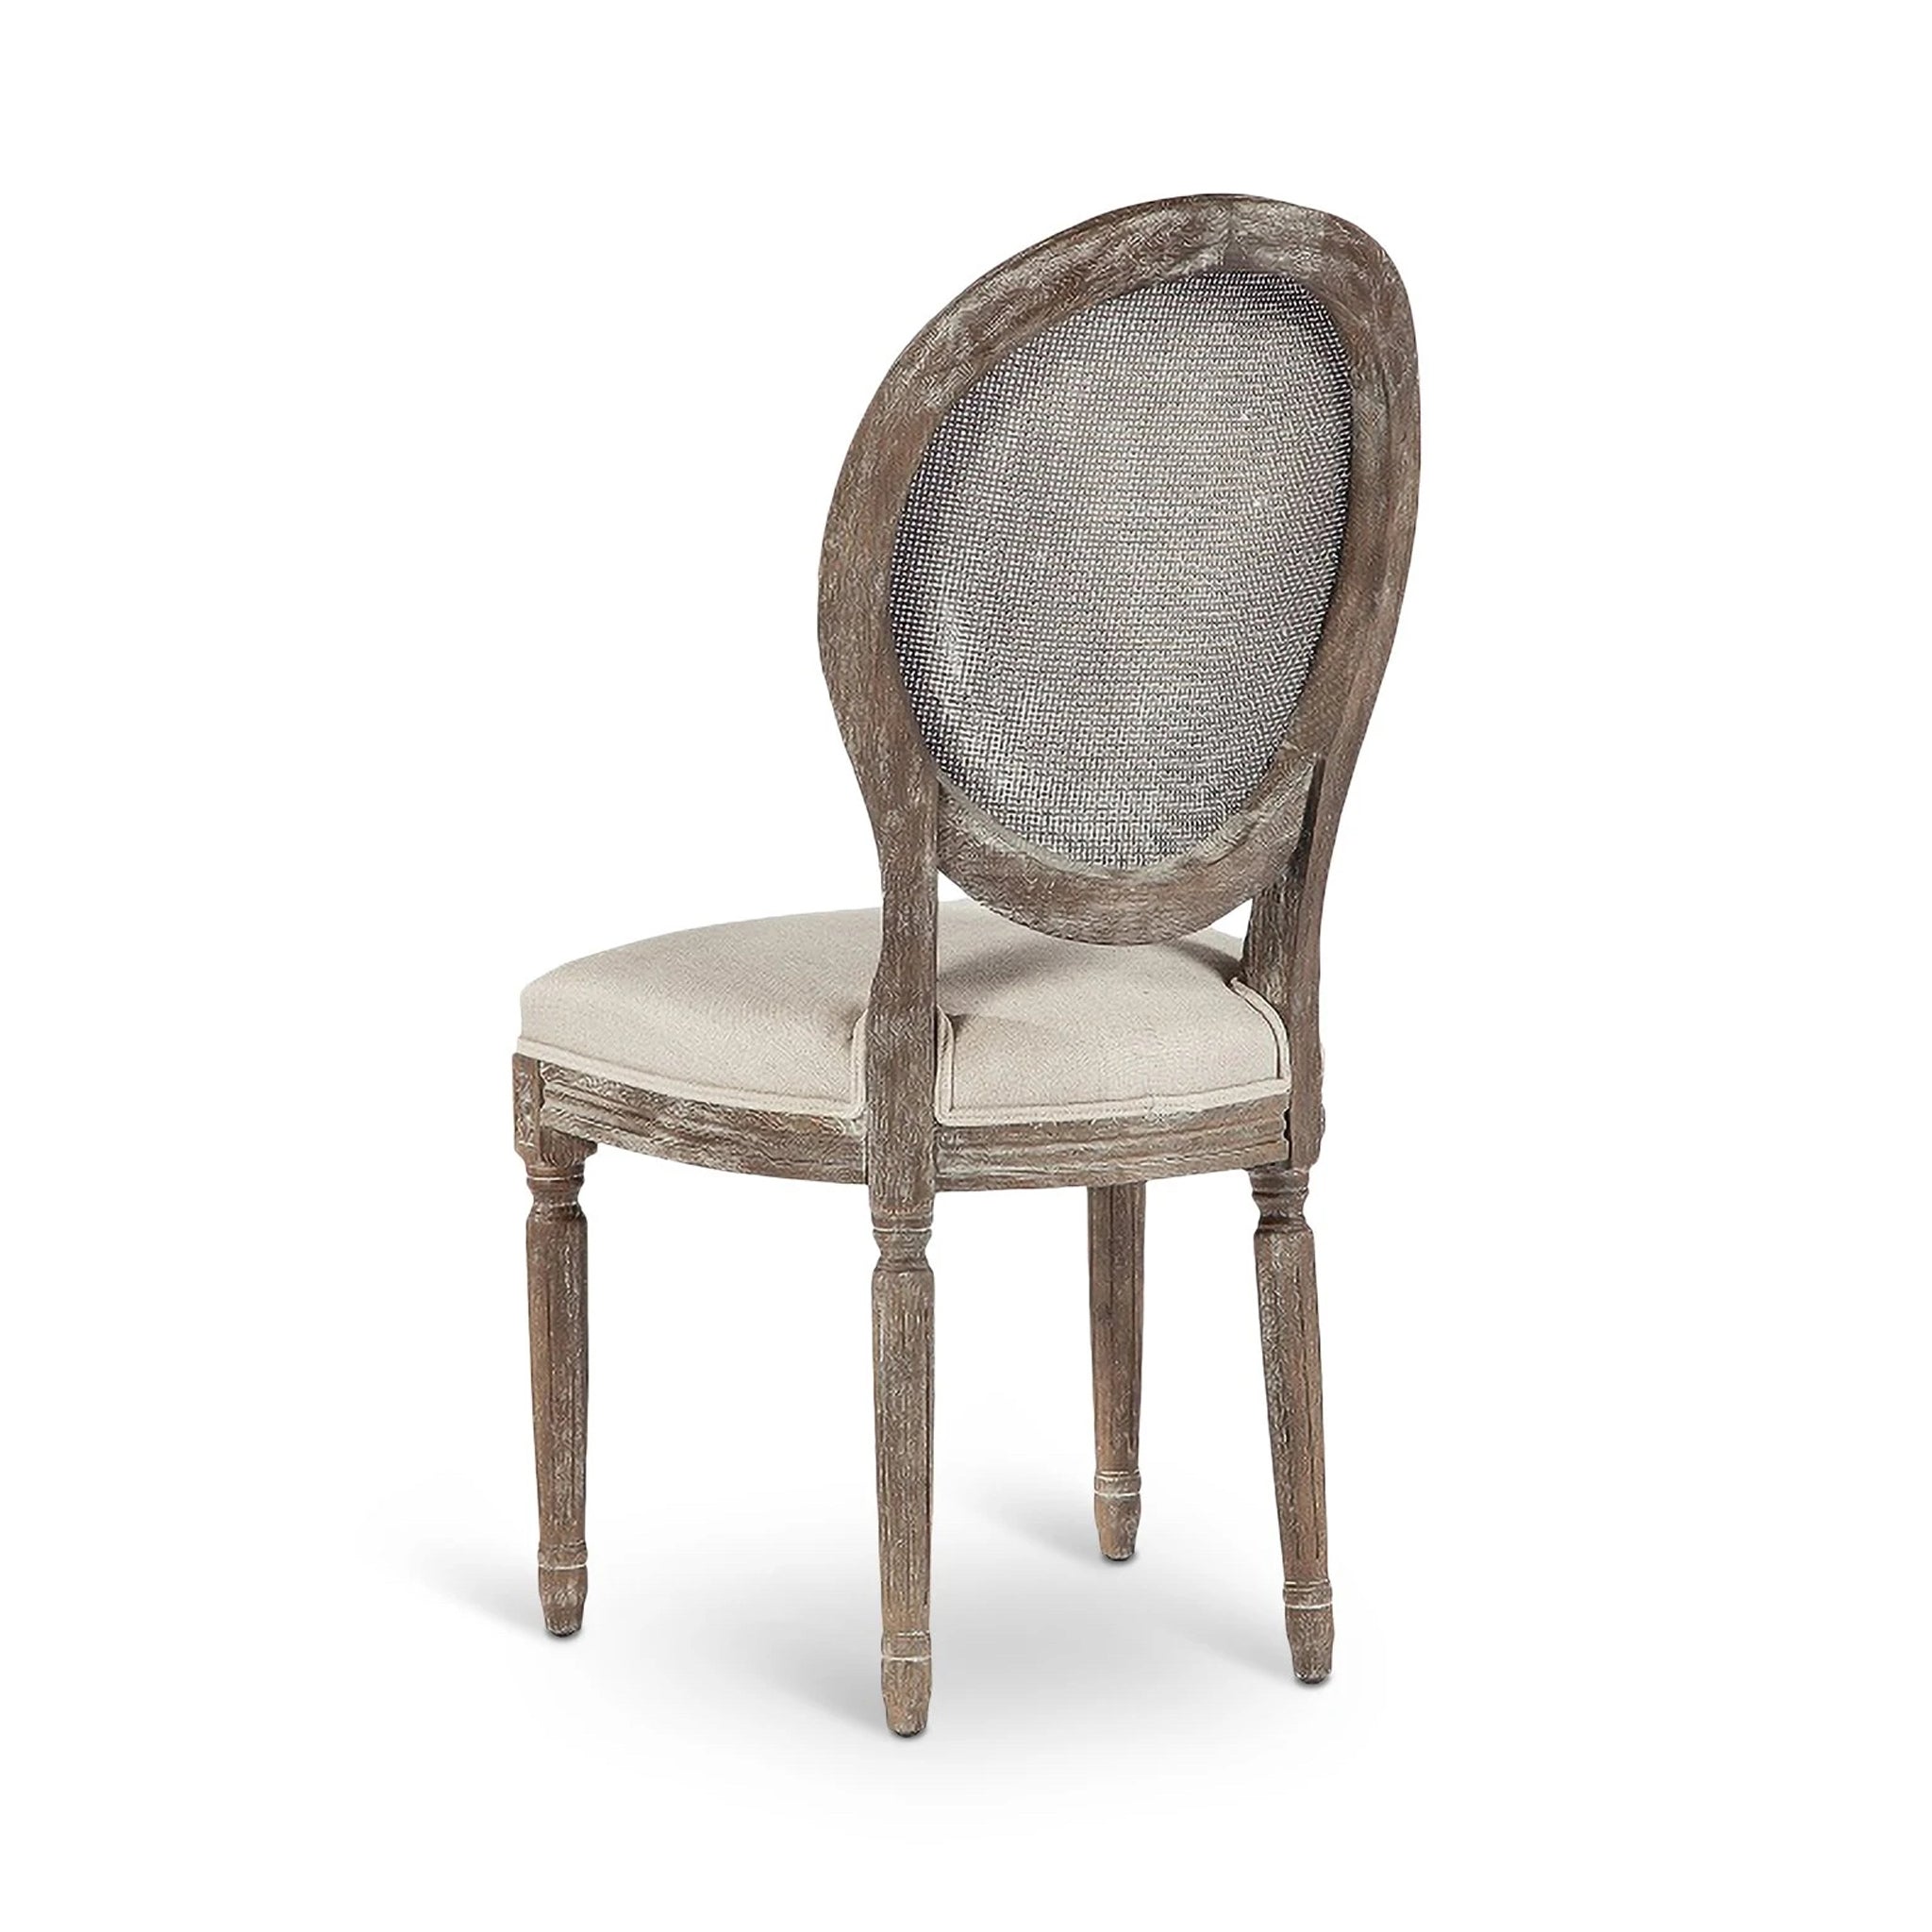 Back Isometric View of the Madame Side Chair on a White Background